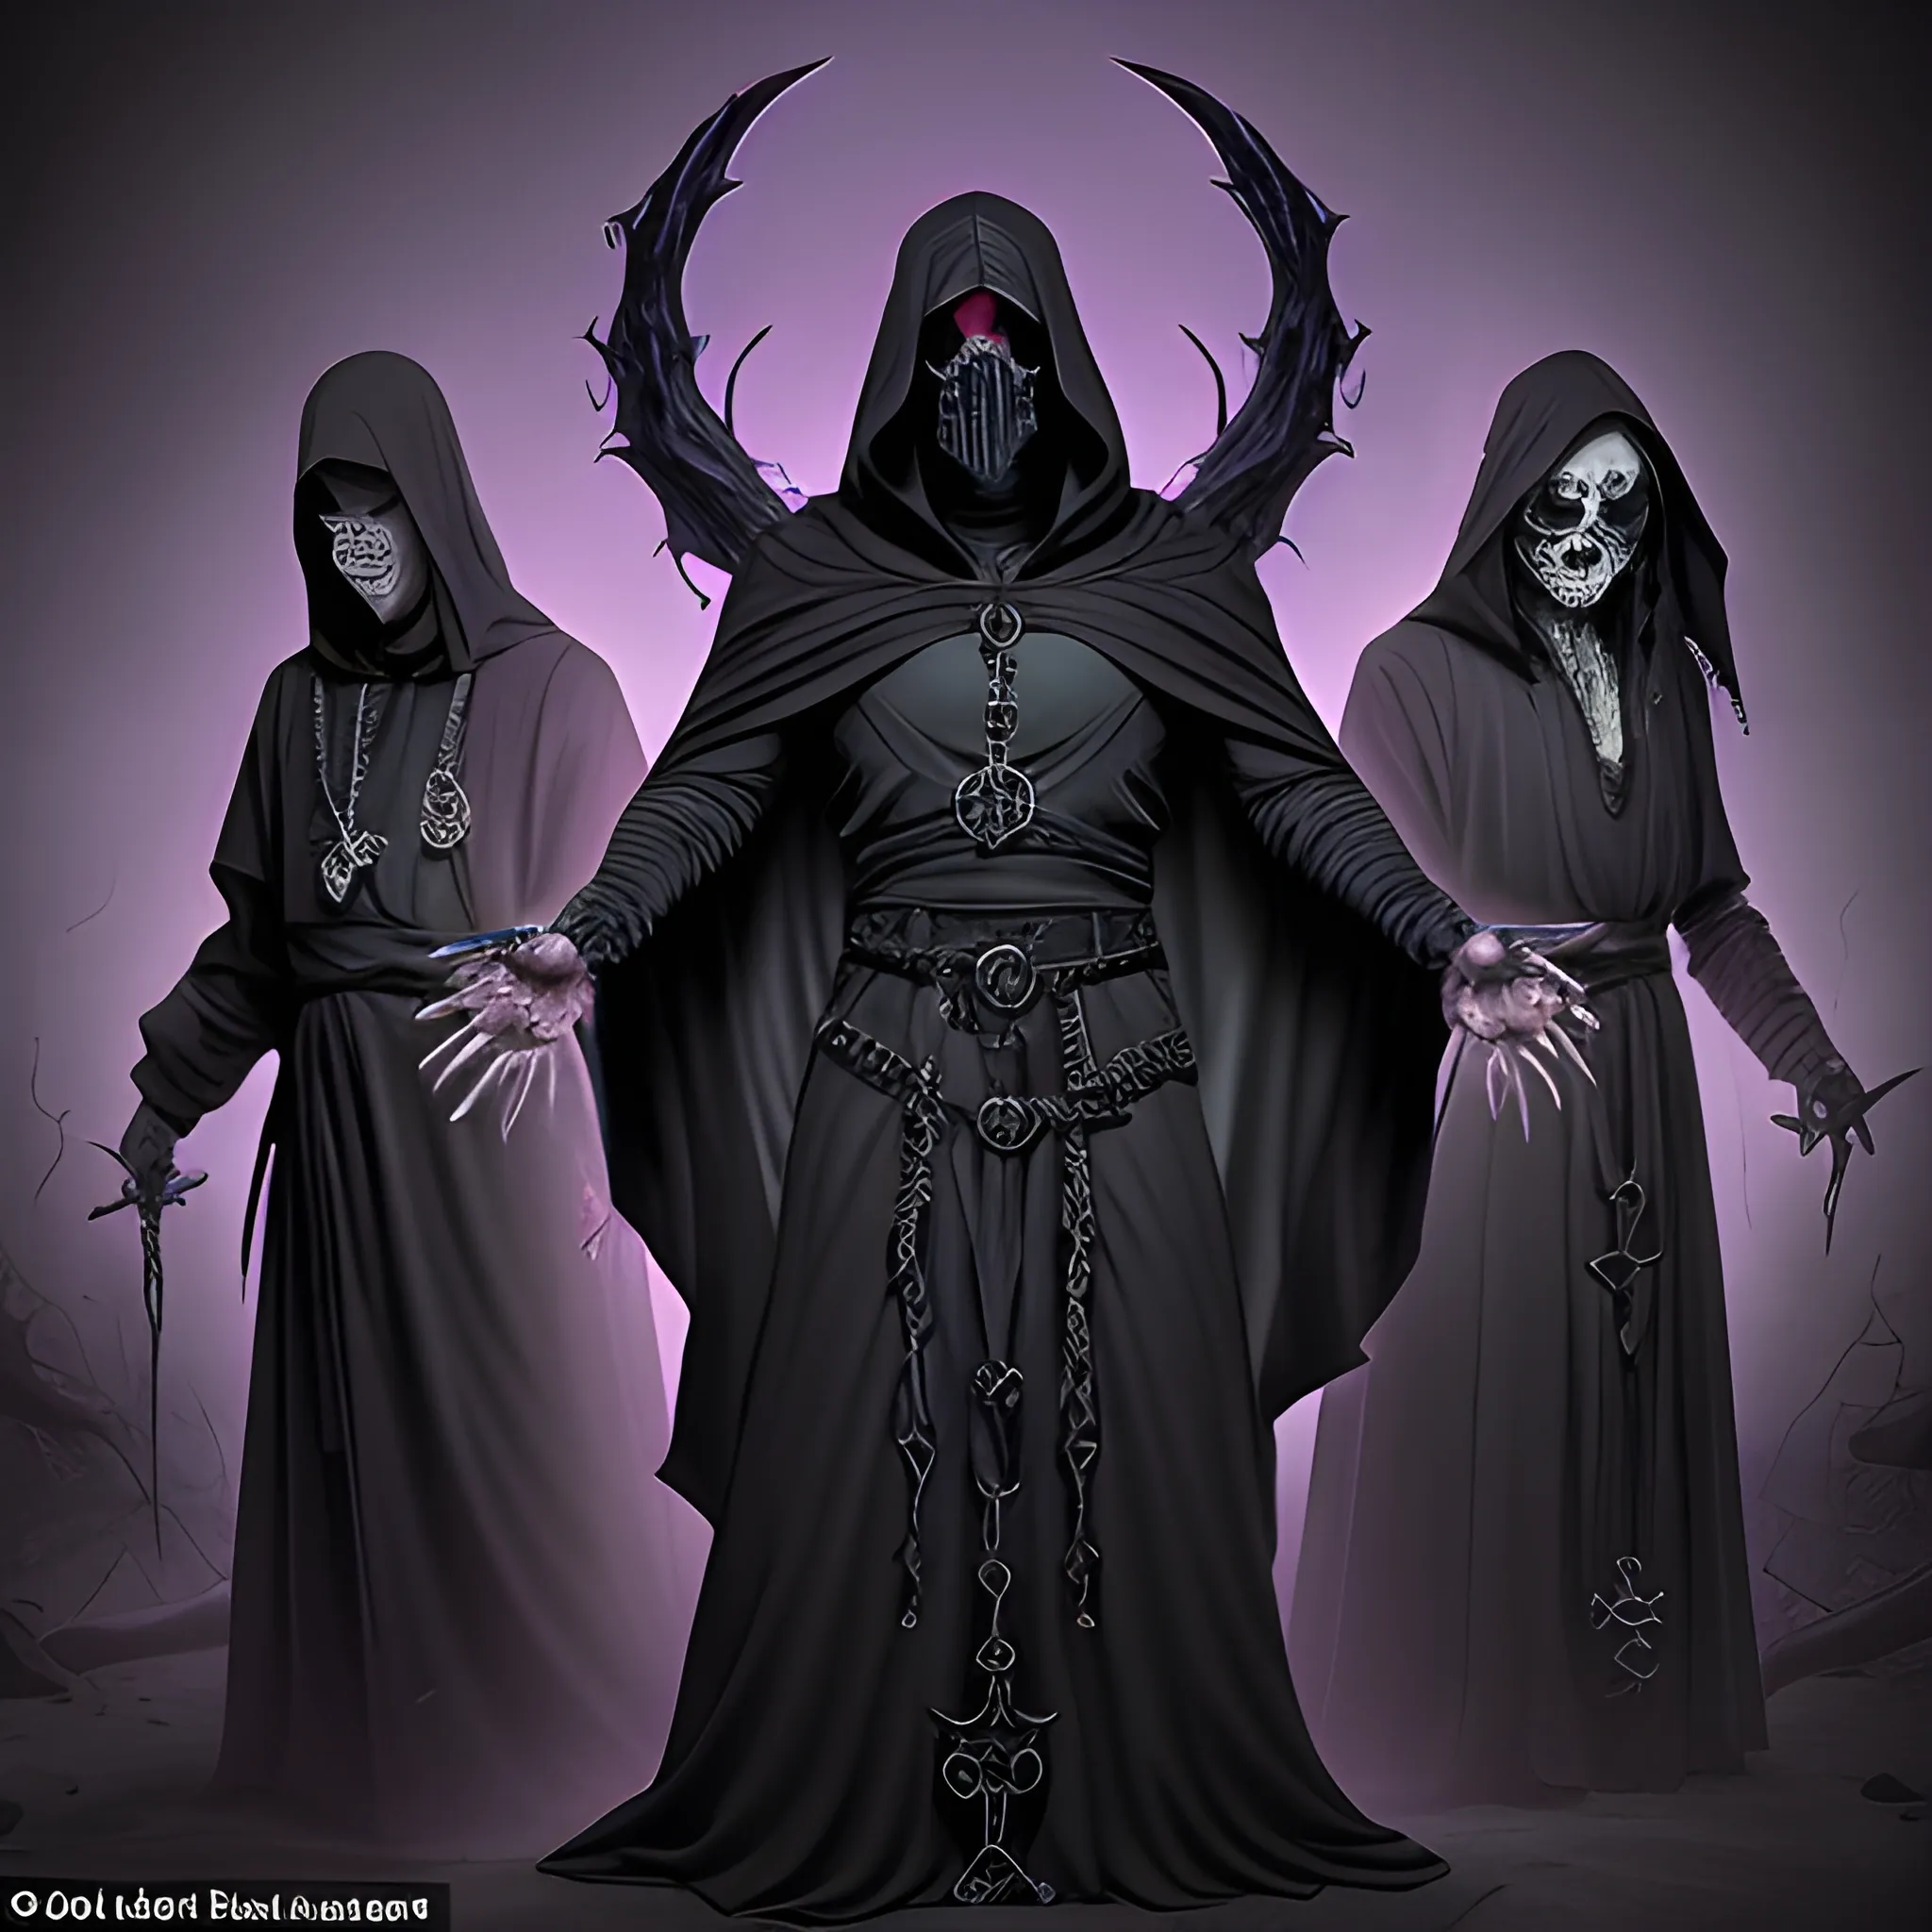 Dark Attire: The cultists wear long, flowing robes in shades of deep purple, black, or dark gray. The robes are often adorned with occult symbols and sigils associated with necromantic magic and Malachi's dark influence. The hoods of their robes are typically pulled up, casting shadows over their faces, giving them an air of mystery and menace.

Face Coverings: Some cultists wear face coverings or masks, further obscuring their features. These coverings often feature unsettling designs, such as skeletal faces or demonic visages, symbolizing their allegiance to death and darkness.

Occult Accessories: Cultists may wear various occult accessories, such as bone necklaces, finger bones, or amulets adorned with dark gems or symbols. These items are believed to channel the powers of necromancy and connect the wearer to the forces of evil.

Pallid Skin: Prolonged exposure to dark magic and their devotion to Malachi may give the cultists' skin a sickly pallor, further emphasizing their otherworldly appearance.

Glowing Eyes: In some cases, the eyes of the cultists may glow with an unnatural or eerie light, hinting at their connection to the dark powers they serve. The glow can be a pale blue, sickly green, or even crimson, depending on the nature of their necromantic abilities.

Ritualistic Tattoos: Some cultists bear ritualistic tattoos etched into their skin, marking their allegiance to Malachi and the dark arts. These tattoos often depict ominous symbols, arcane runes, or images associated with death and decay.

Feral Traits: As a result of their embrace of dark powers, some cultists may display feral traits, such as elongated canine teeth or claw-like nails, reminiscent of creatures of the night.

Overall, the appearance of Malachi's cultists is haunting and unsettling, with an aura of darkness and malevolence. Their attire, accessories, and physical features convey their allegiance to the fallen Aasimar and their commitment to furthering his nefarious plans. As they move in shadows and secrecy, they pose a significant threat to the world, ready to carry out their master's bidding and plunge Lumina Isle into everlasting darkness.